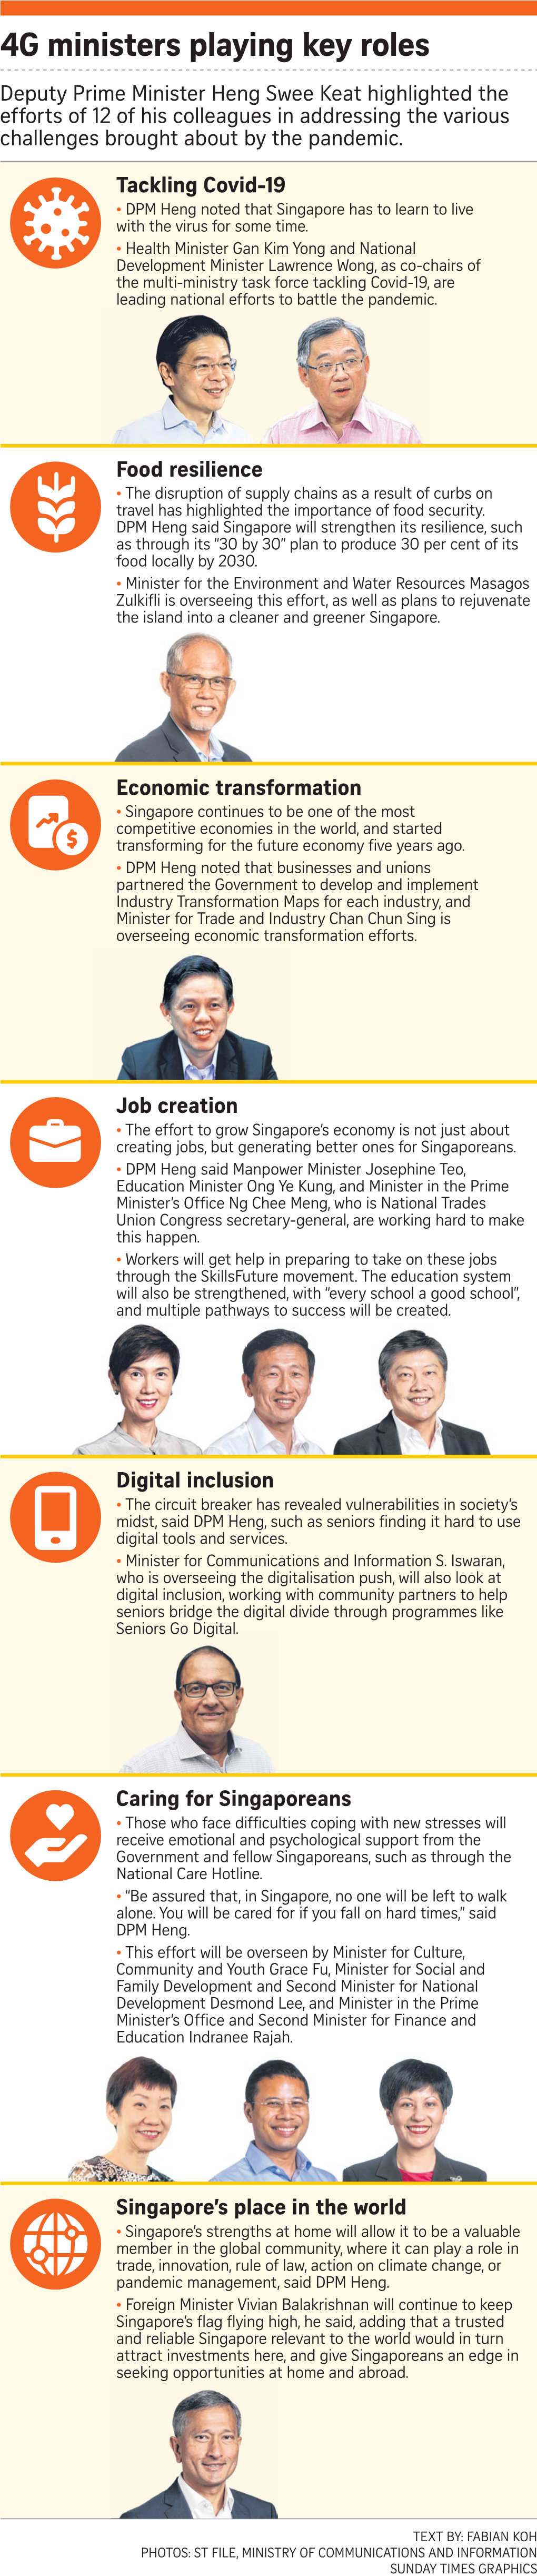 4G Ministers Playing Key Roles